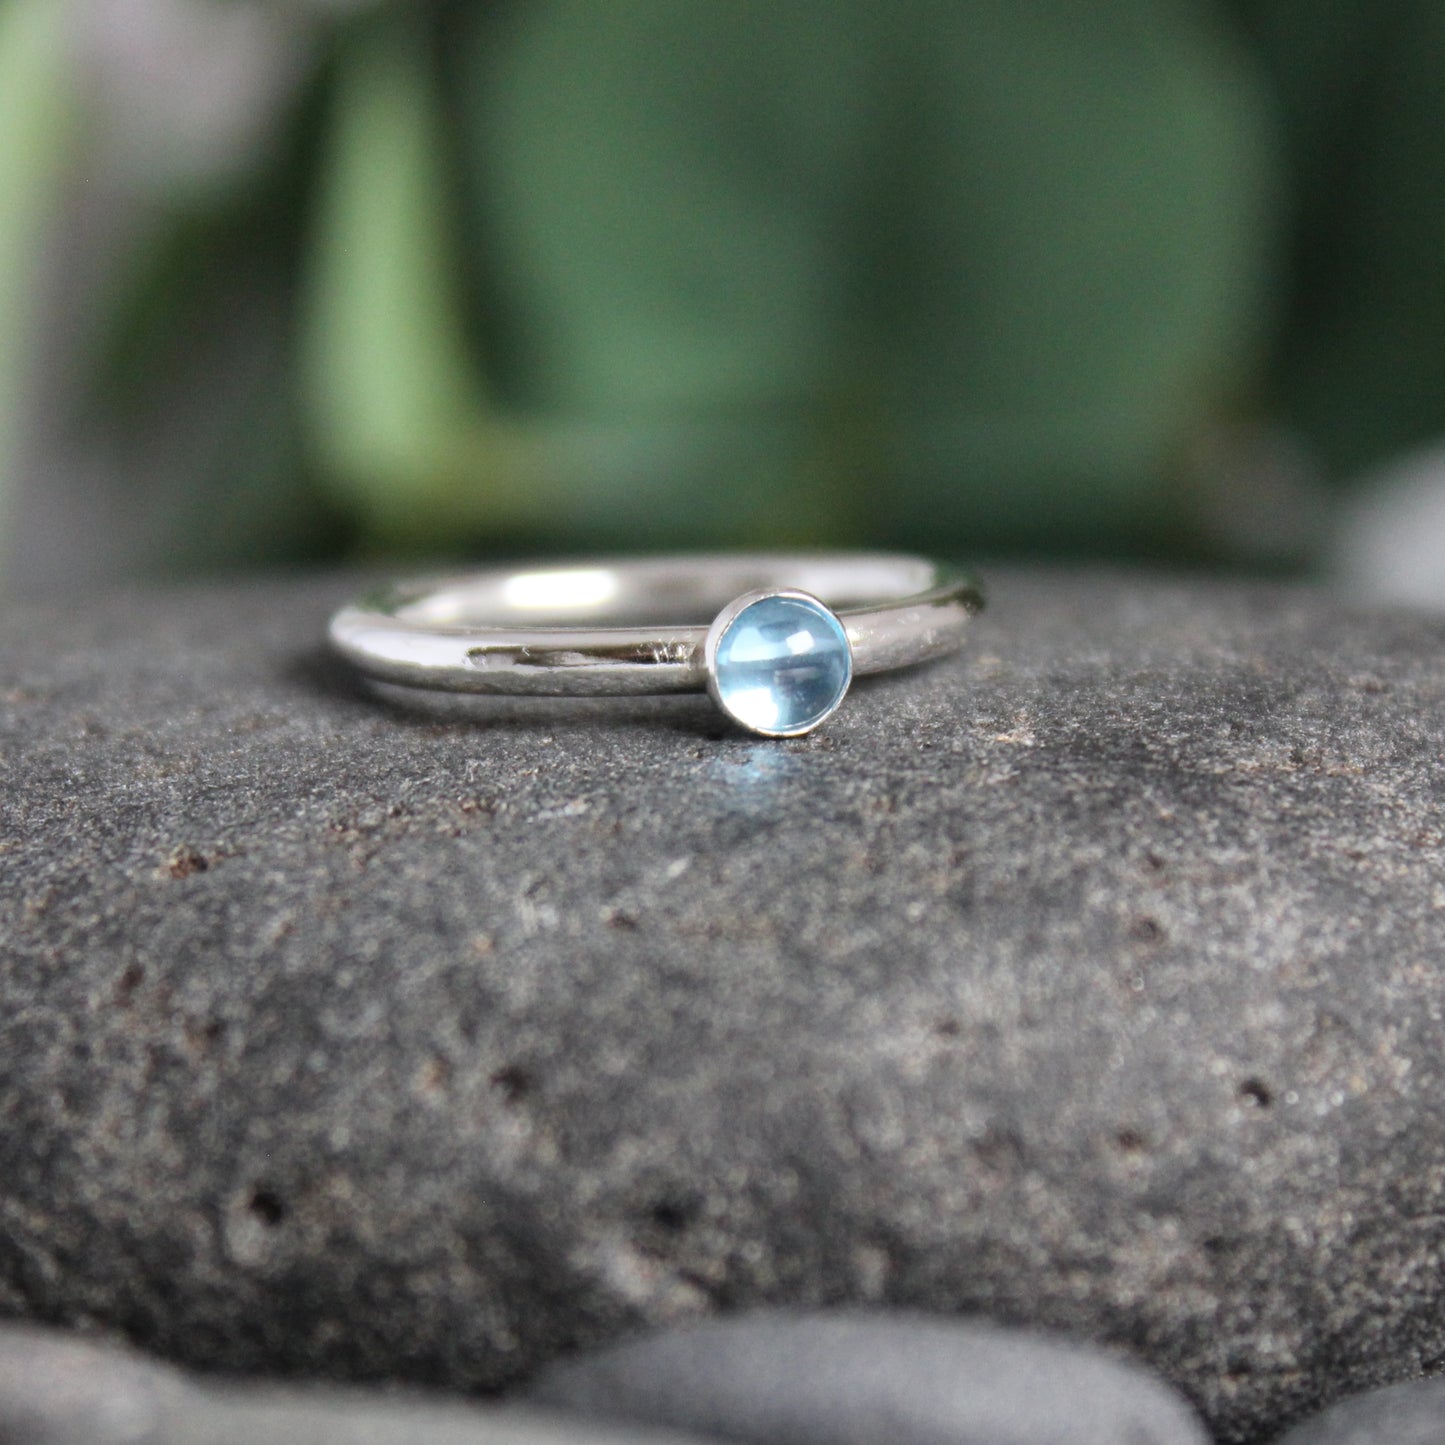 A 4mm round blue topaz cabochon set in a handmade sterling silver bezel setting on a sturdy silver band. 